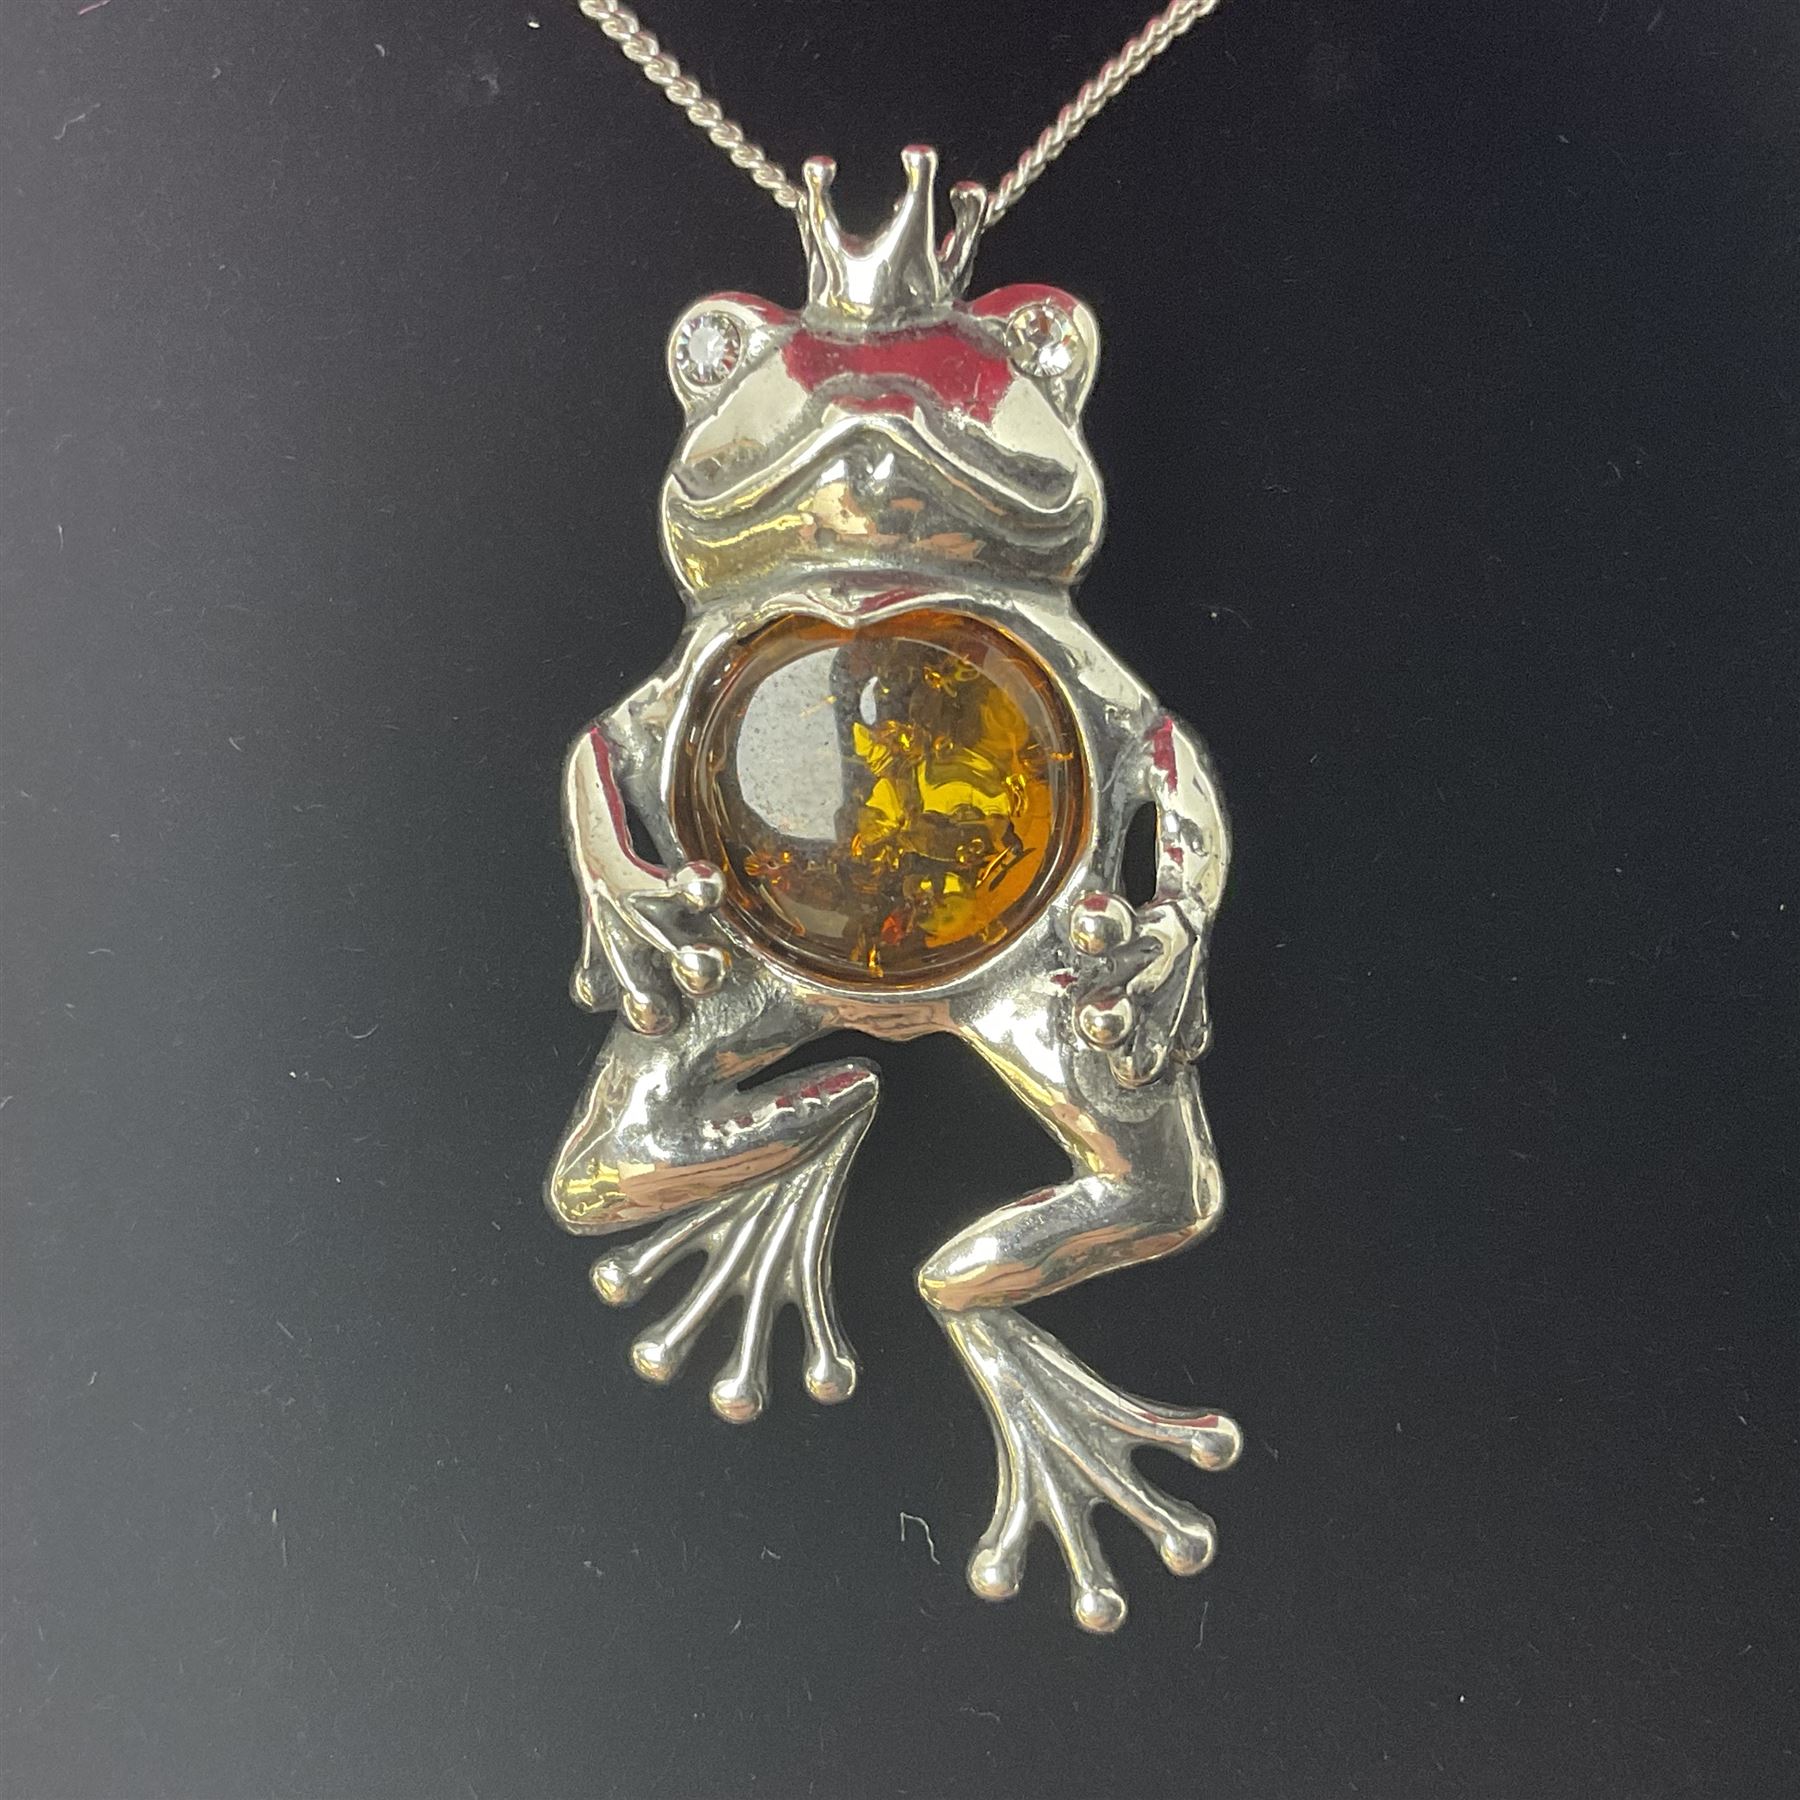 Silver Baltic amber frog prince pendant necklace - Image 2 of 5